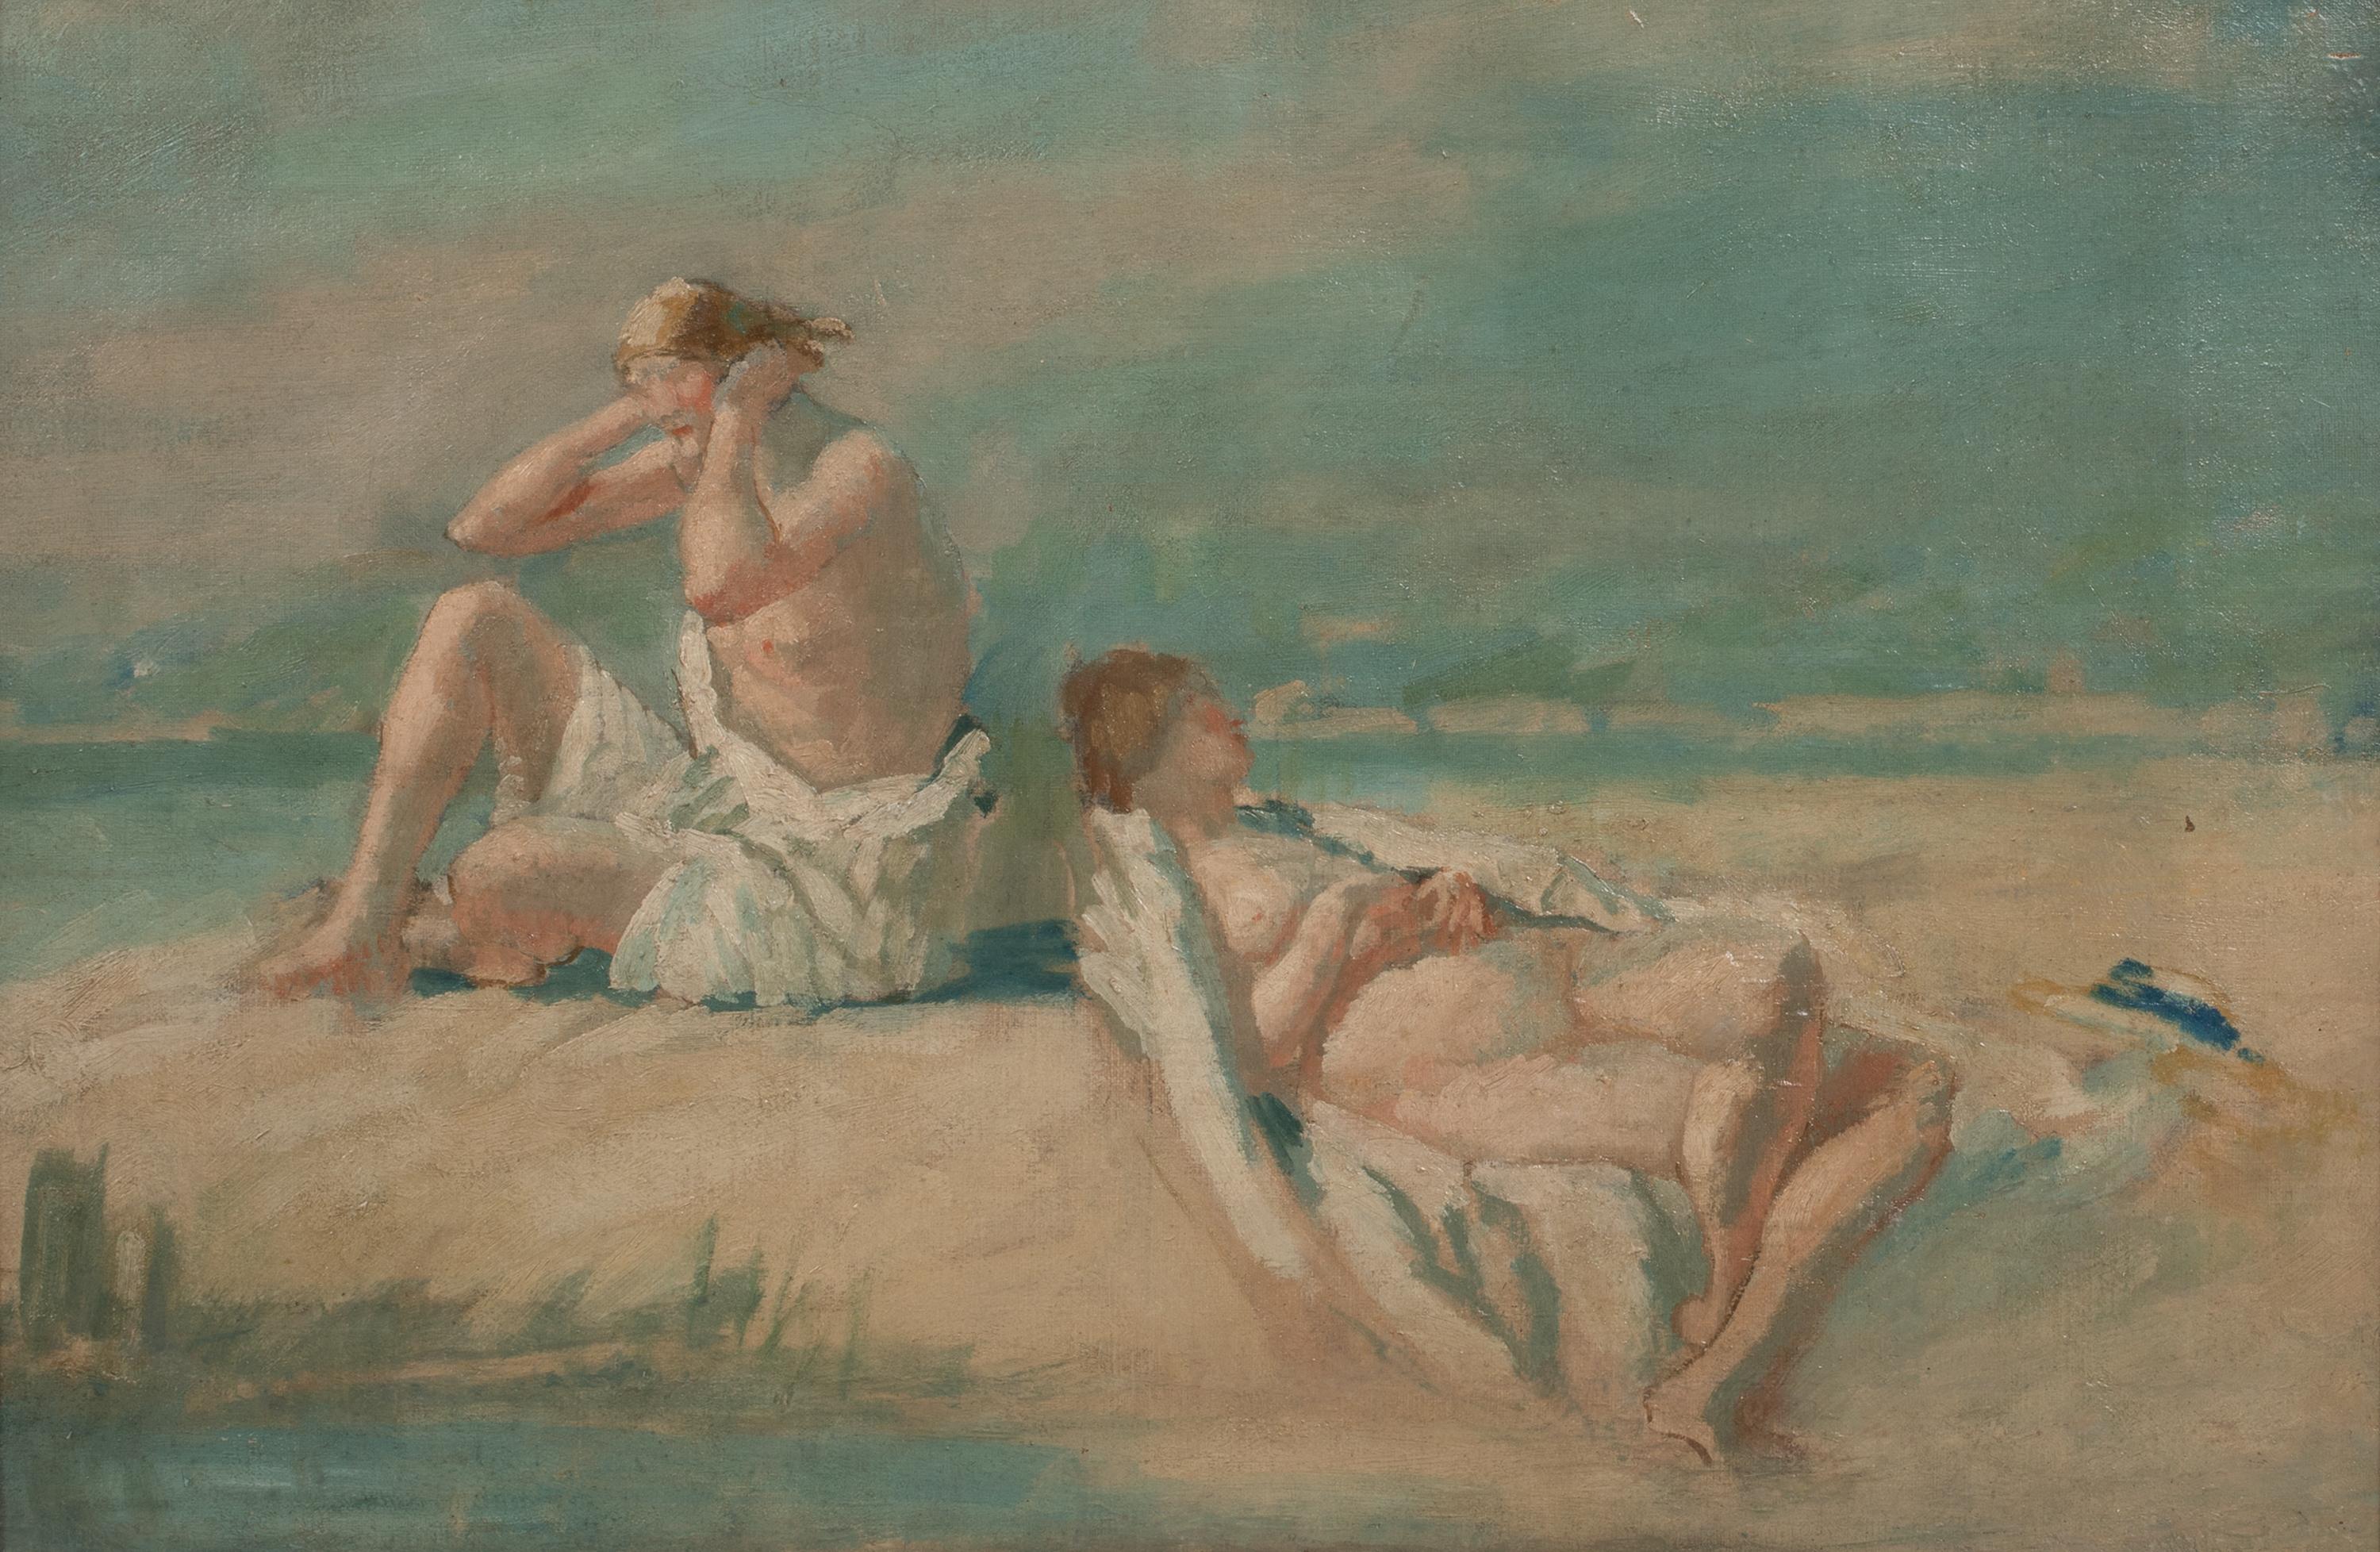 Nudes Sunbathing On A Beach, 19th Century

circle of PHILIP WILSON STEER (1860-1942)

Large 19th Century English beach scene with nudes sunbathing, oil on canvas. Excellent quality and condition circa 1900 Impressionist figurative study of a pair of